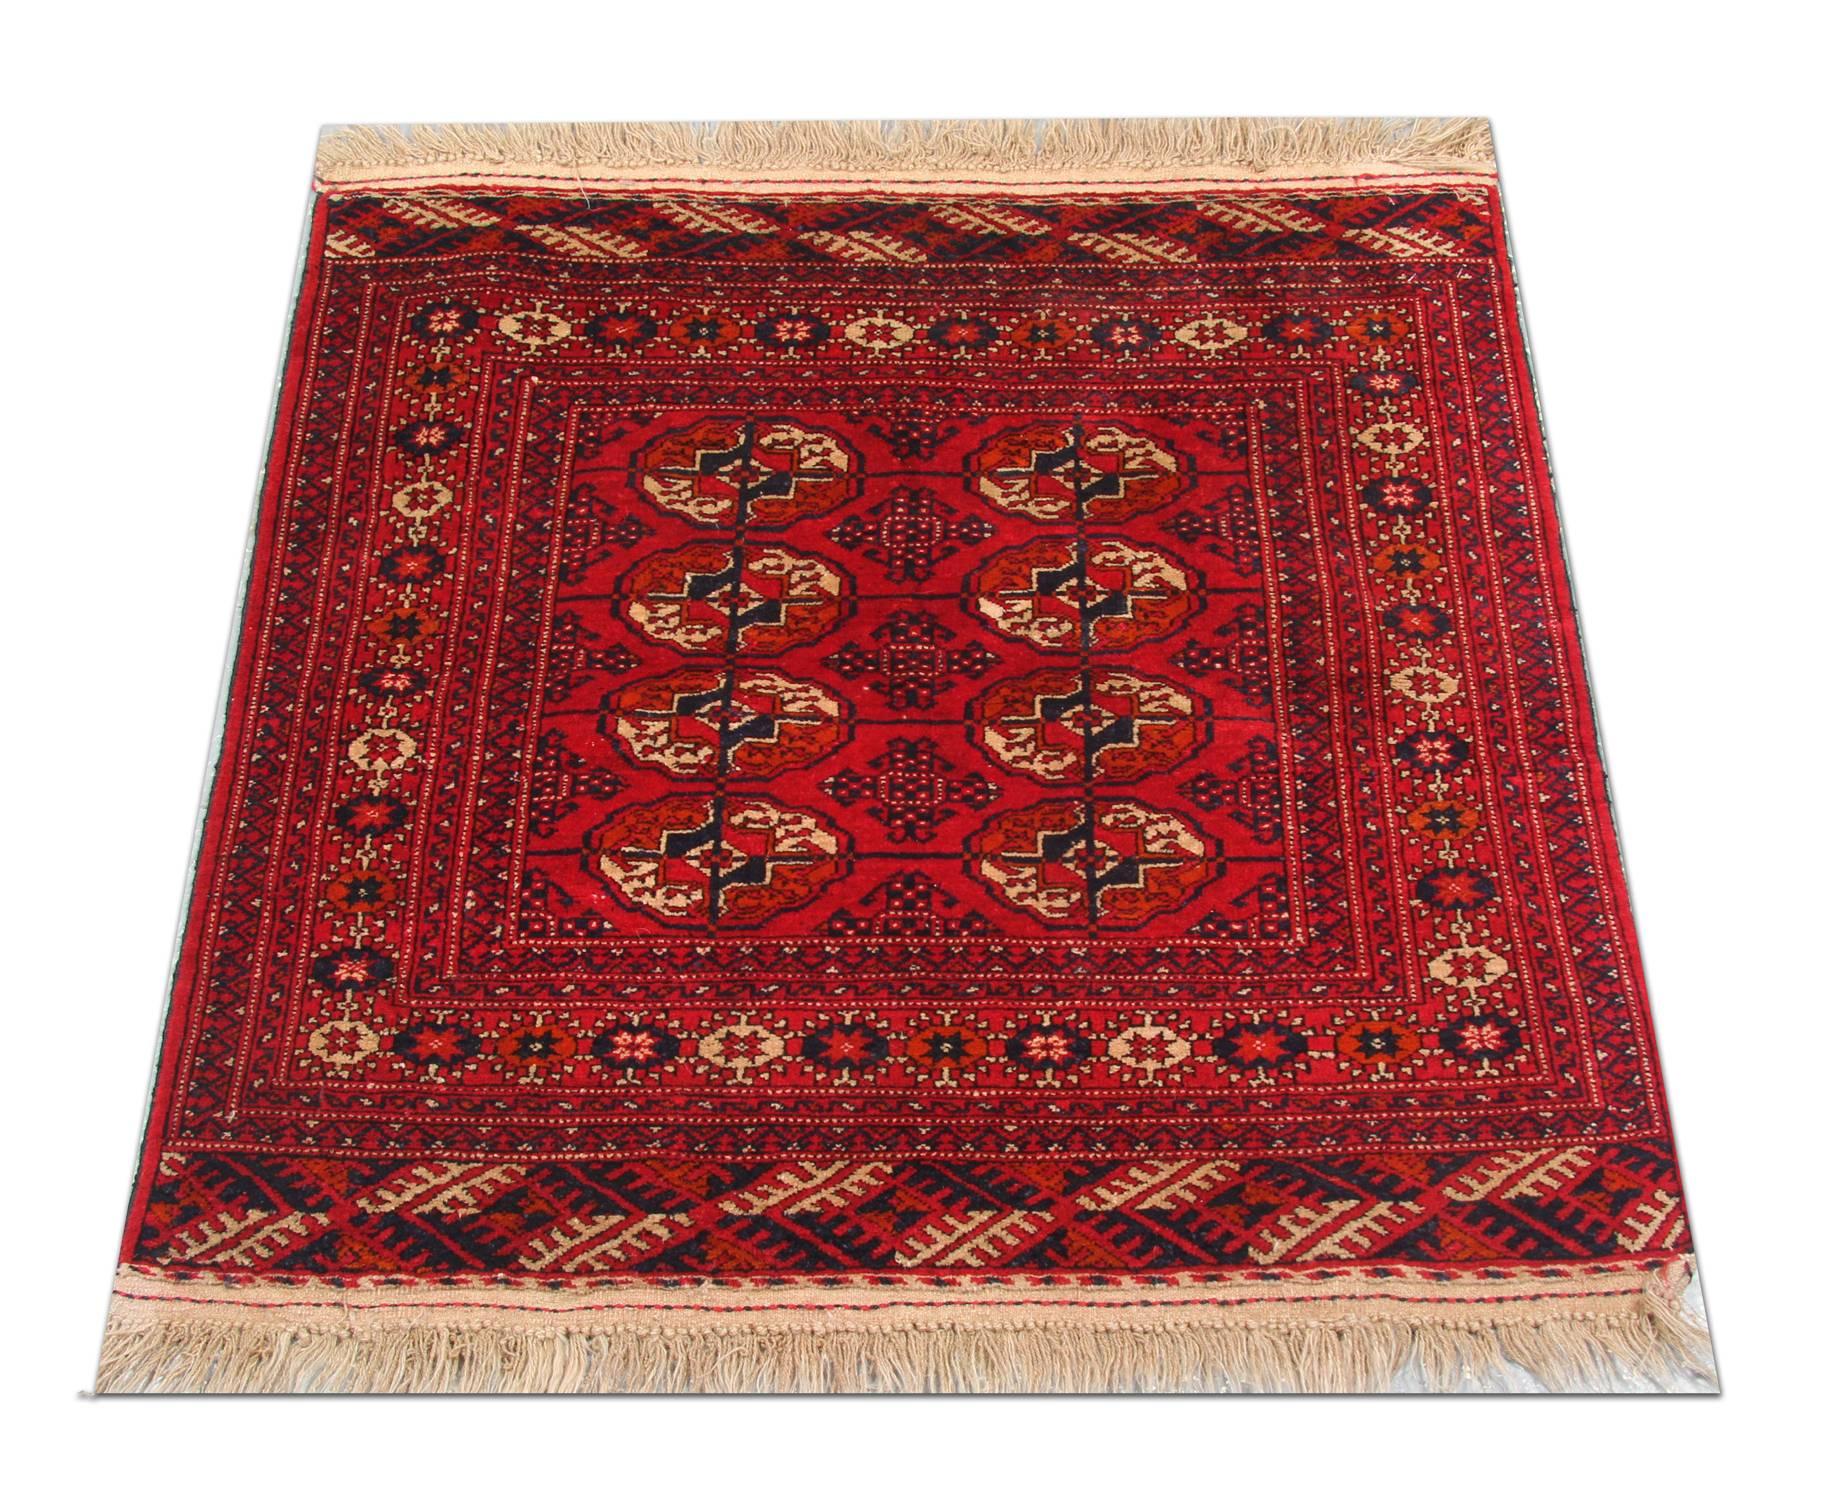 A rich red background is a field for the symmetrical oriental design woven by hand. The central medallions are intricately woven with cream, black and brown accents. A decorative repeat pattern has then framed this. Both the color and design of this